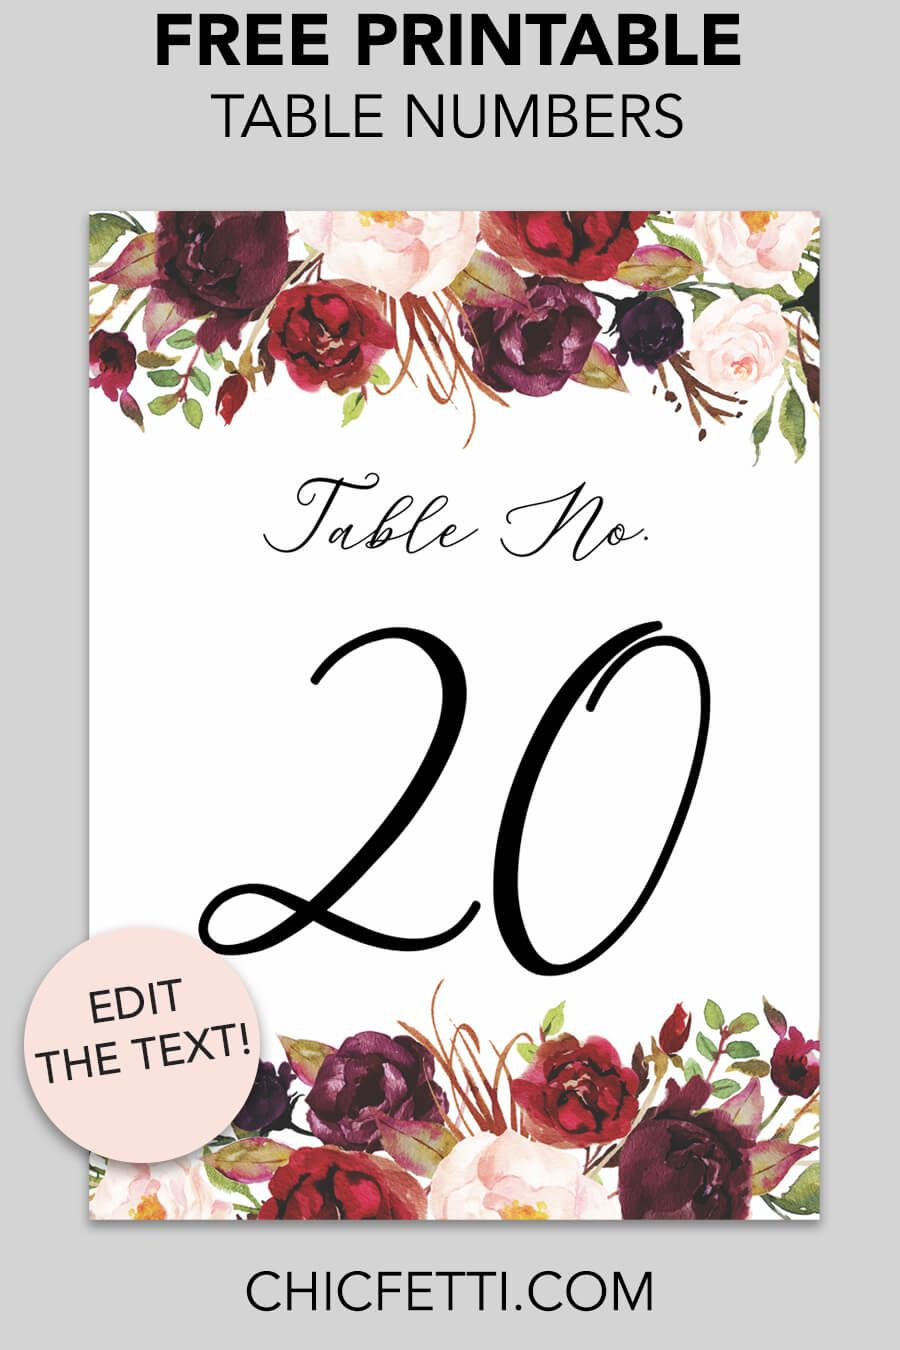 Free Printable Table Numbers - Download And Print These Free Printab - Free Printable Table Numbers